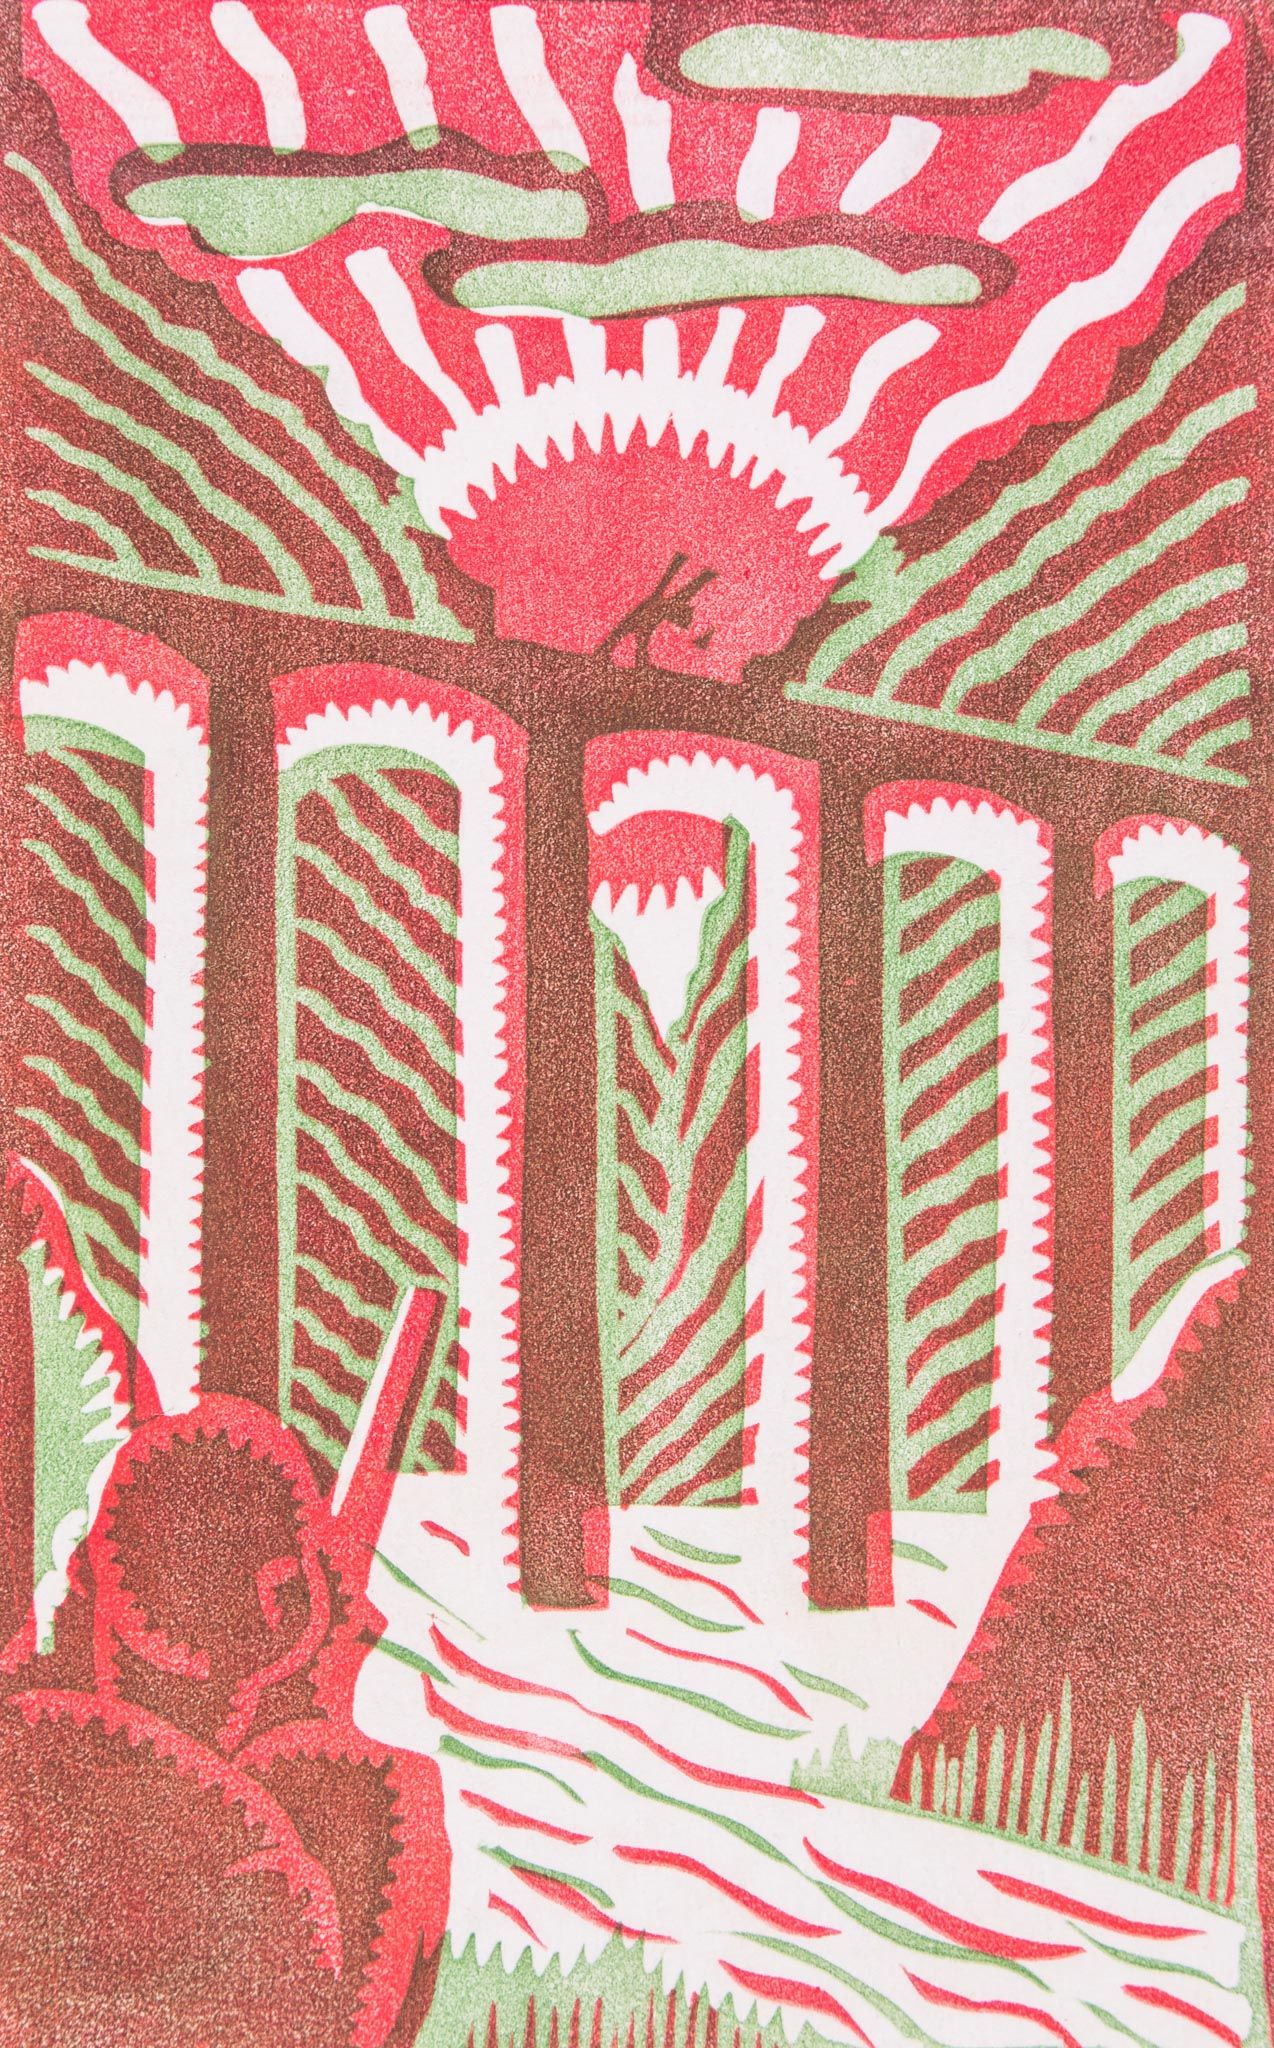 Rosamund Burnett (1904-1968) The Sniper linocut printed in vermillion and mid-greed, with